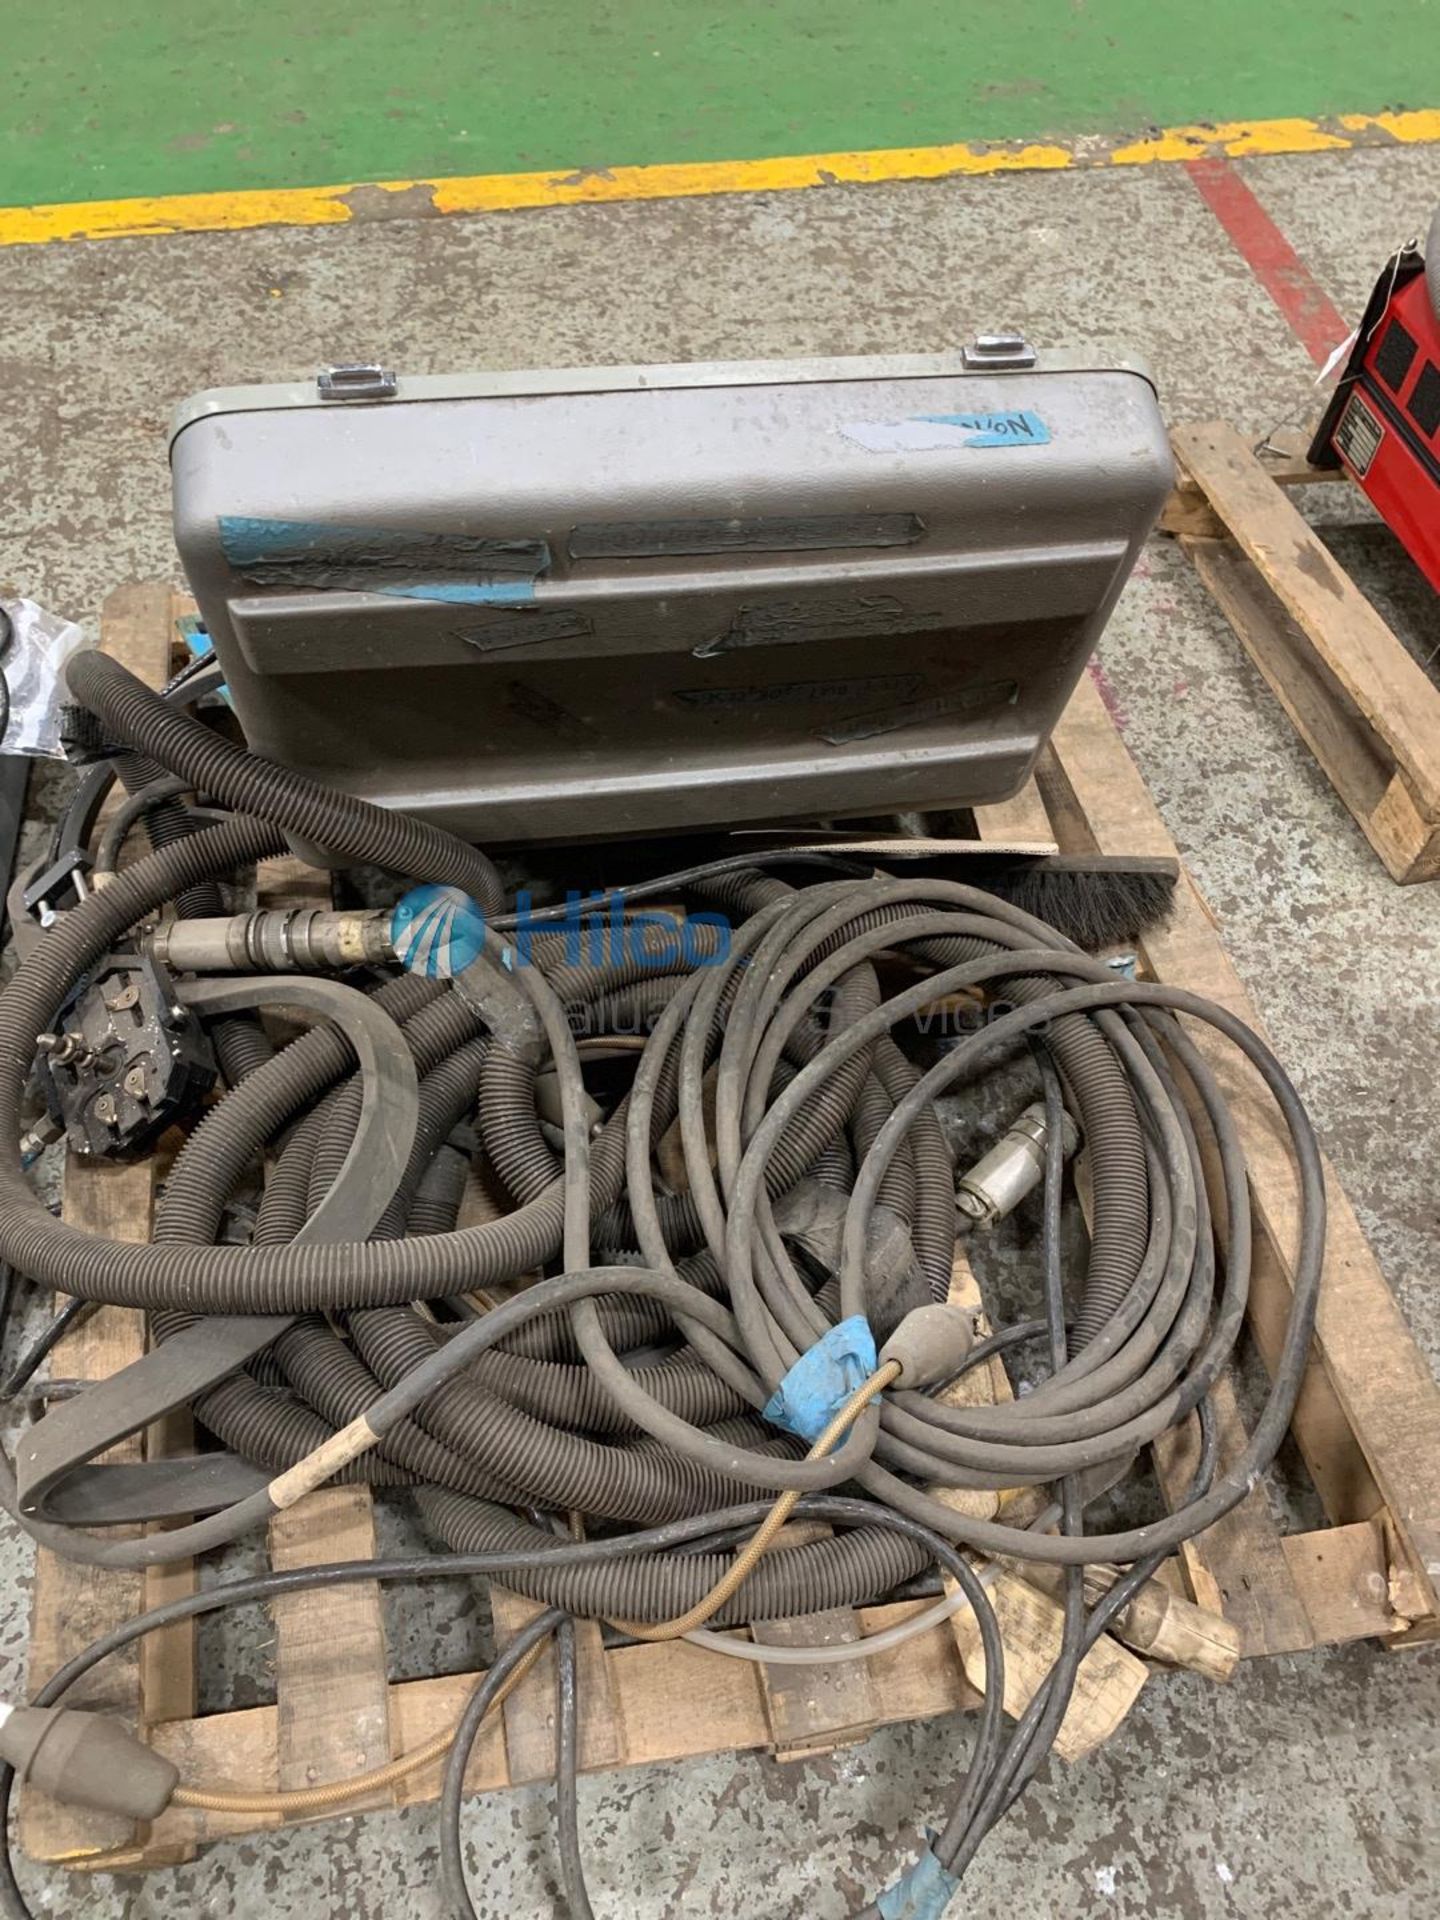 Arc Machines Inc Model 6A Torch & Wire Feed, Serial No. 53286, with Case - Image 4 of 4